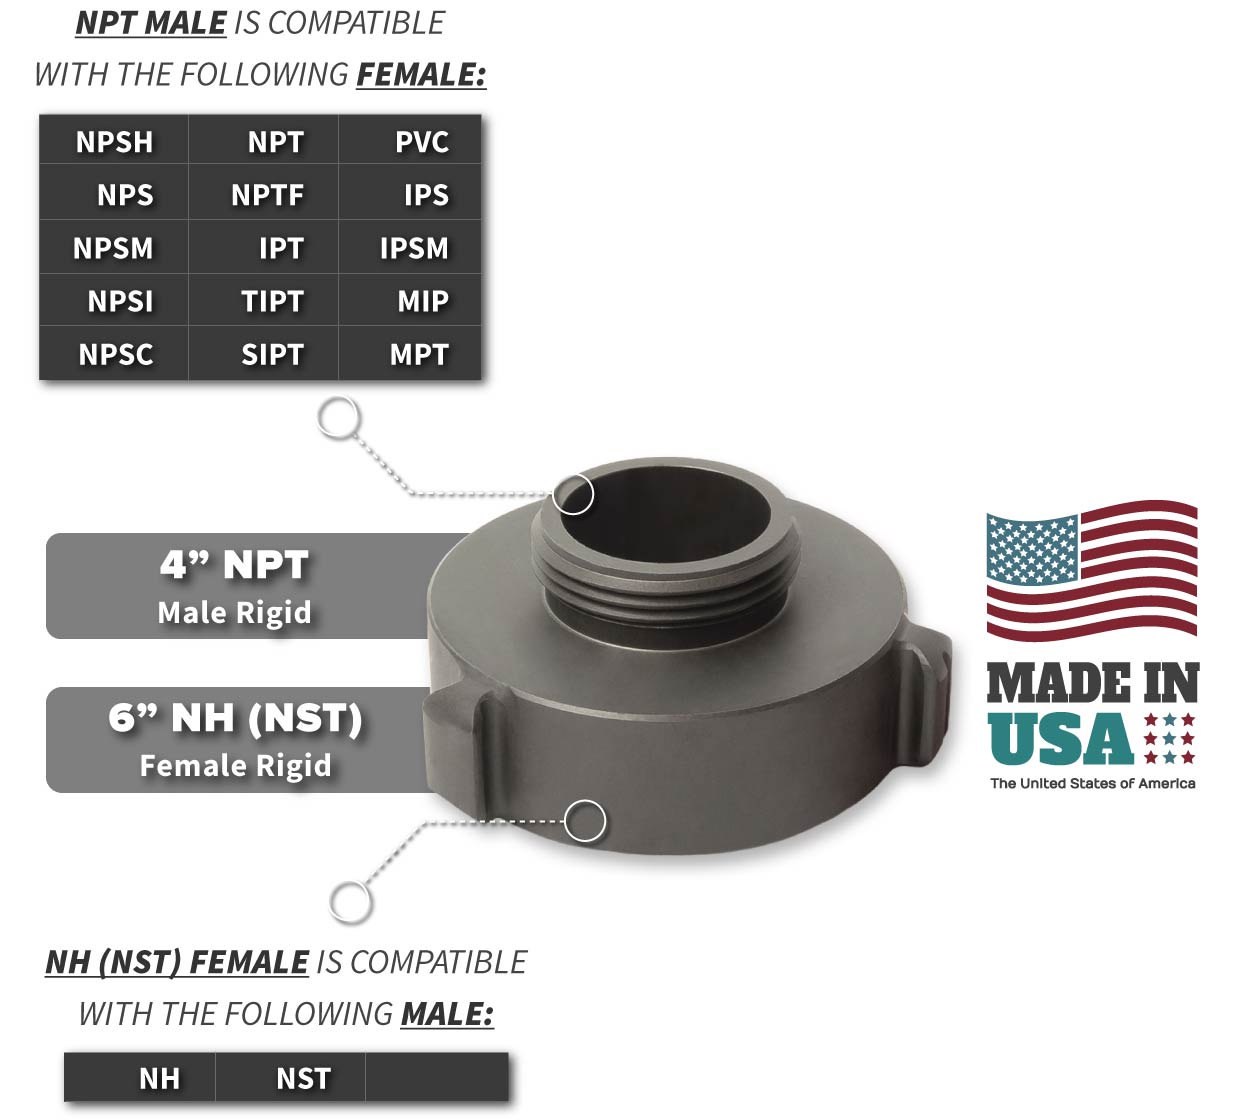 6 Inch NH-NST Female x 4 Inch NPT Male Compatibility Thread Chart